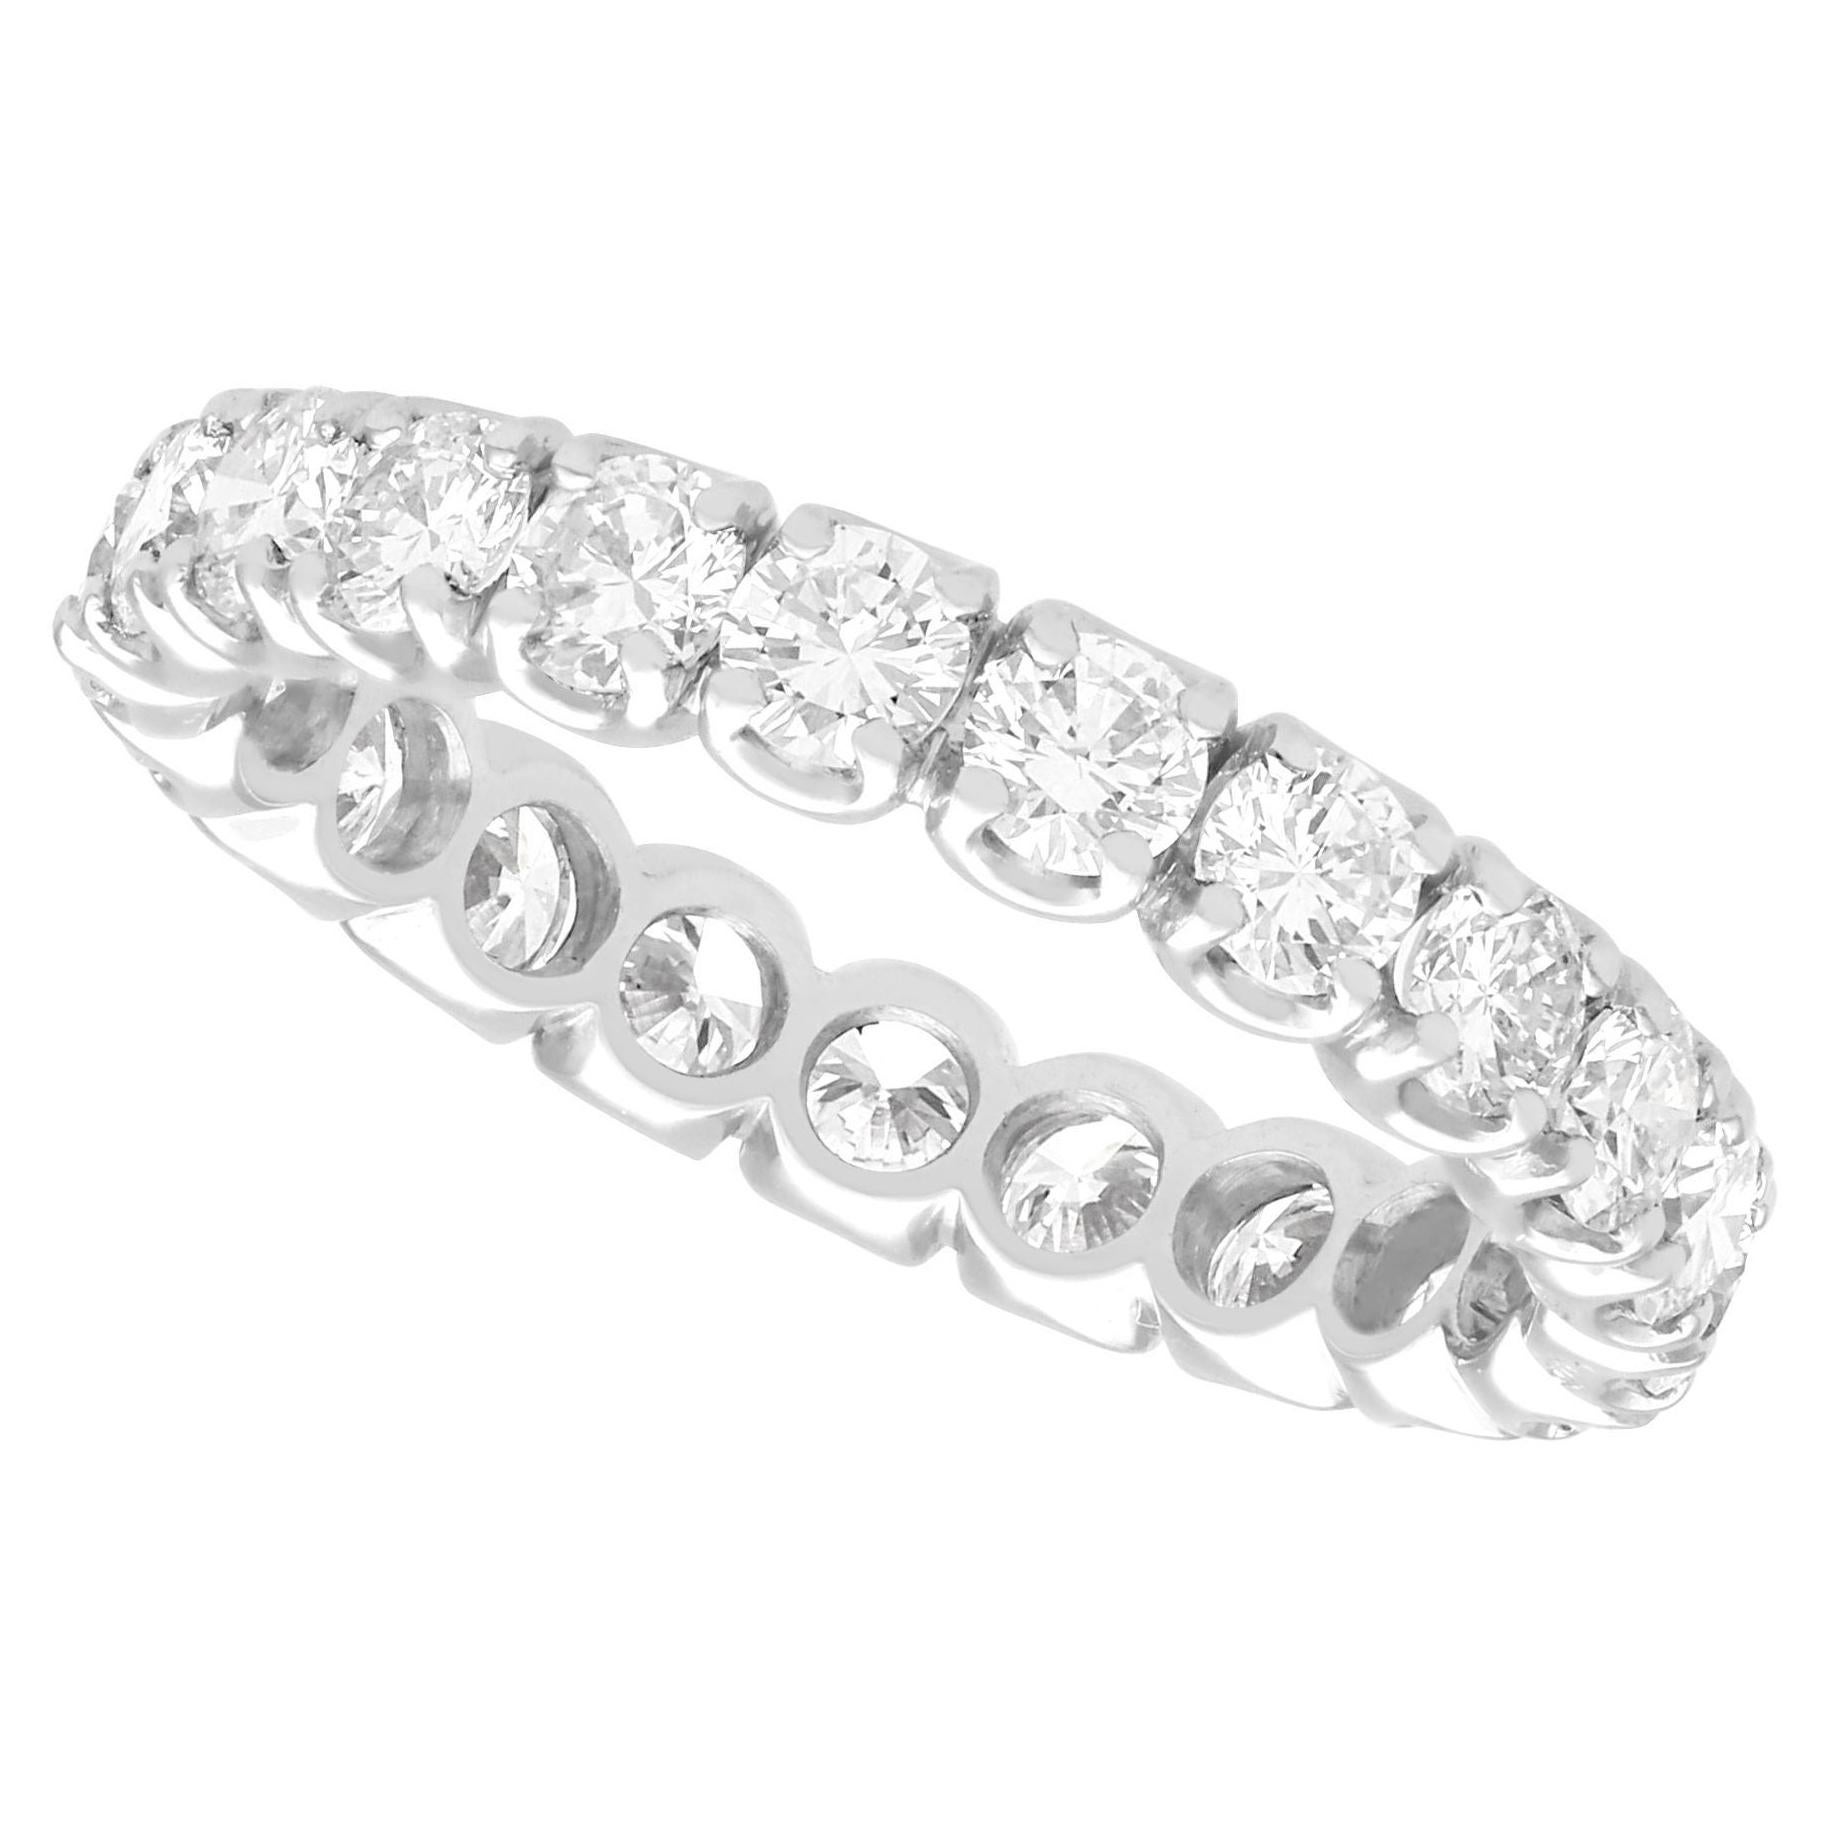 1.89 Carat Diamond and White Gold Full Eternity Ring, circa 1980 For Sale